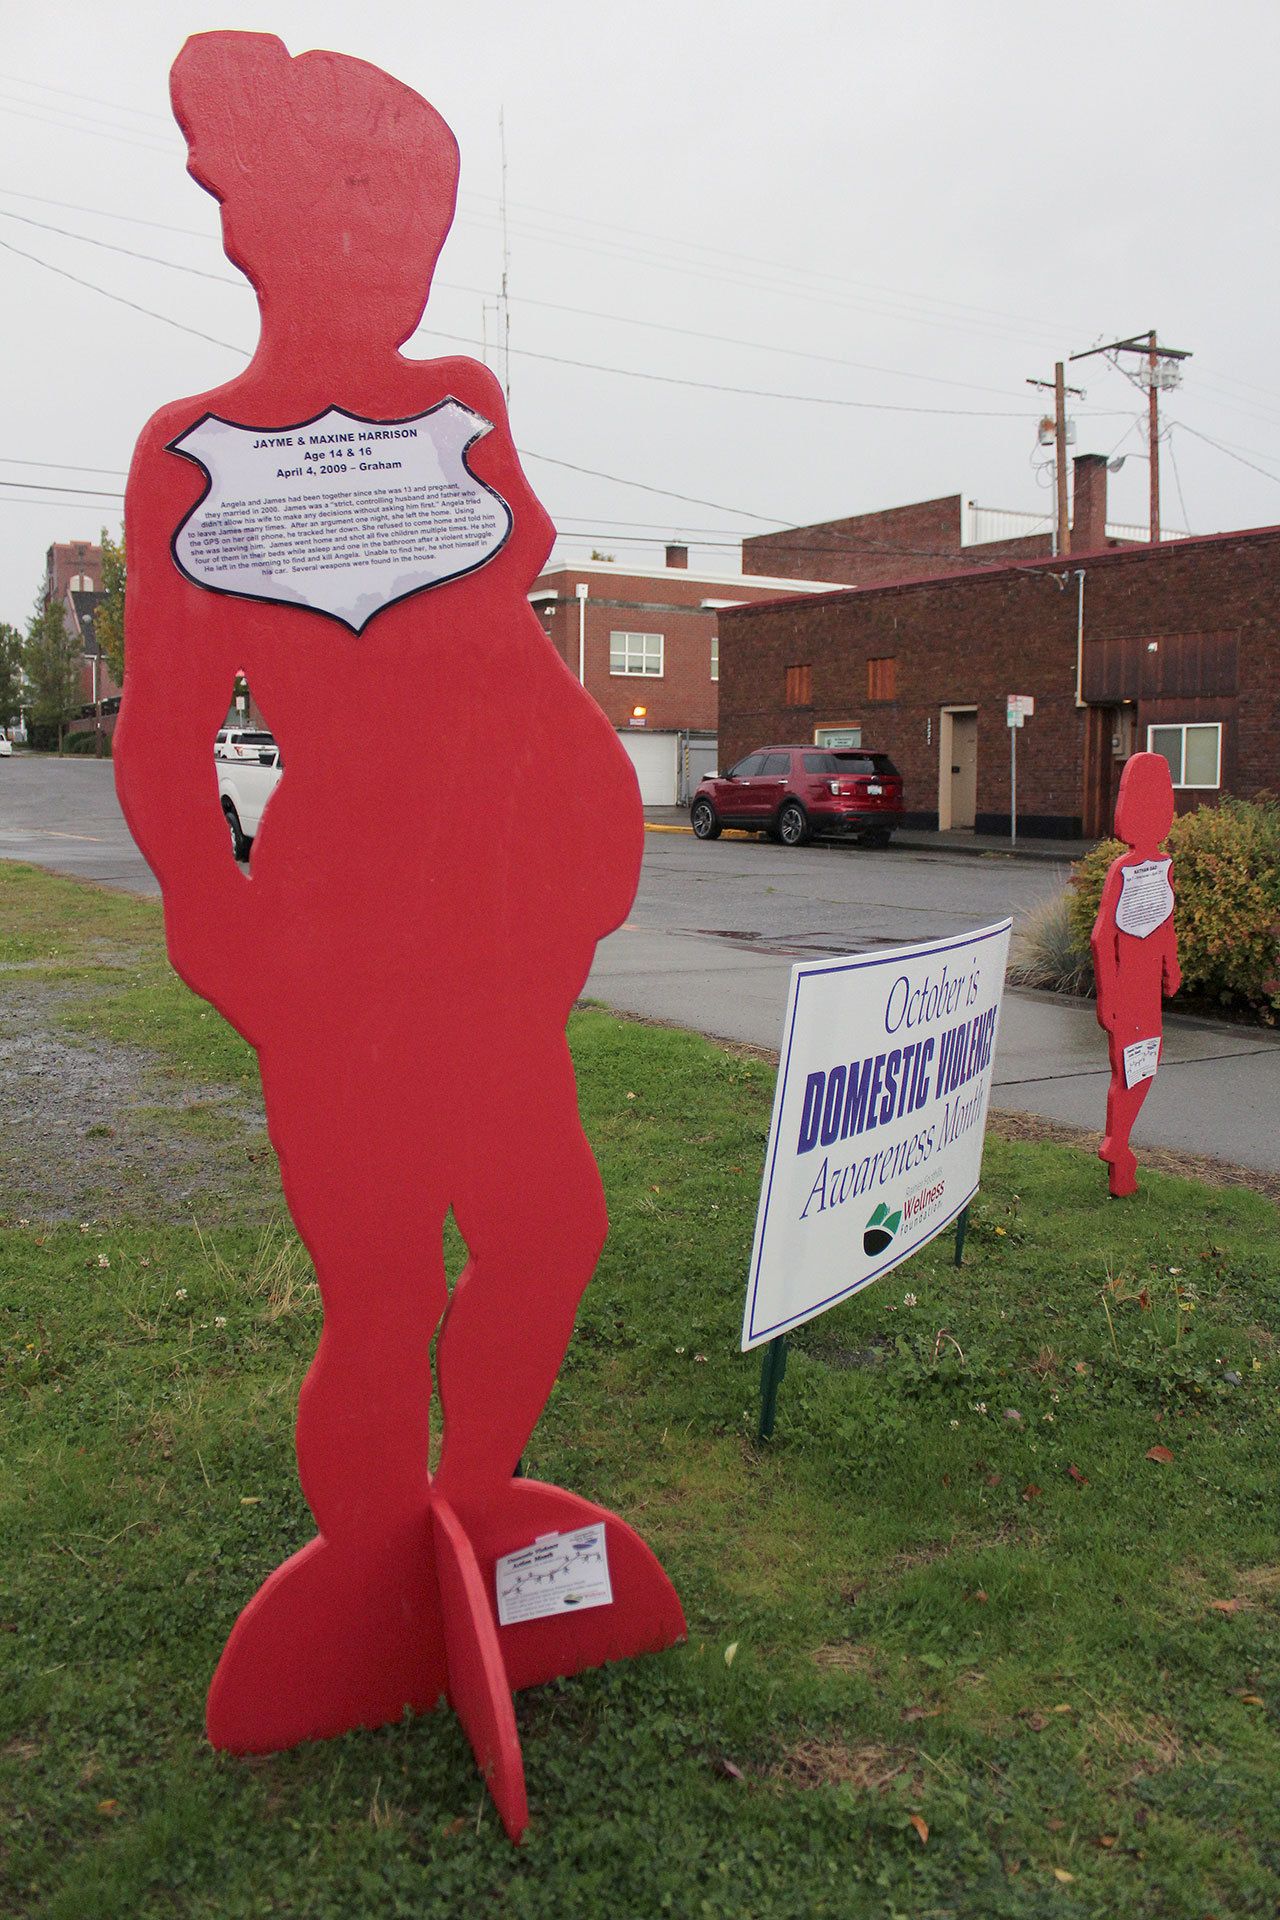 Stories about Domestic Violence can be seen all around Enumclaw during the month of October. Photo by Ray Still